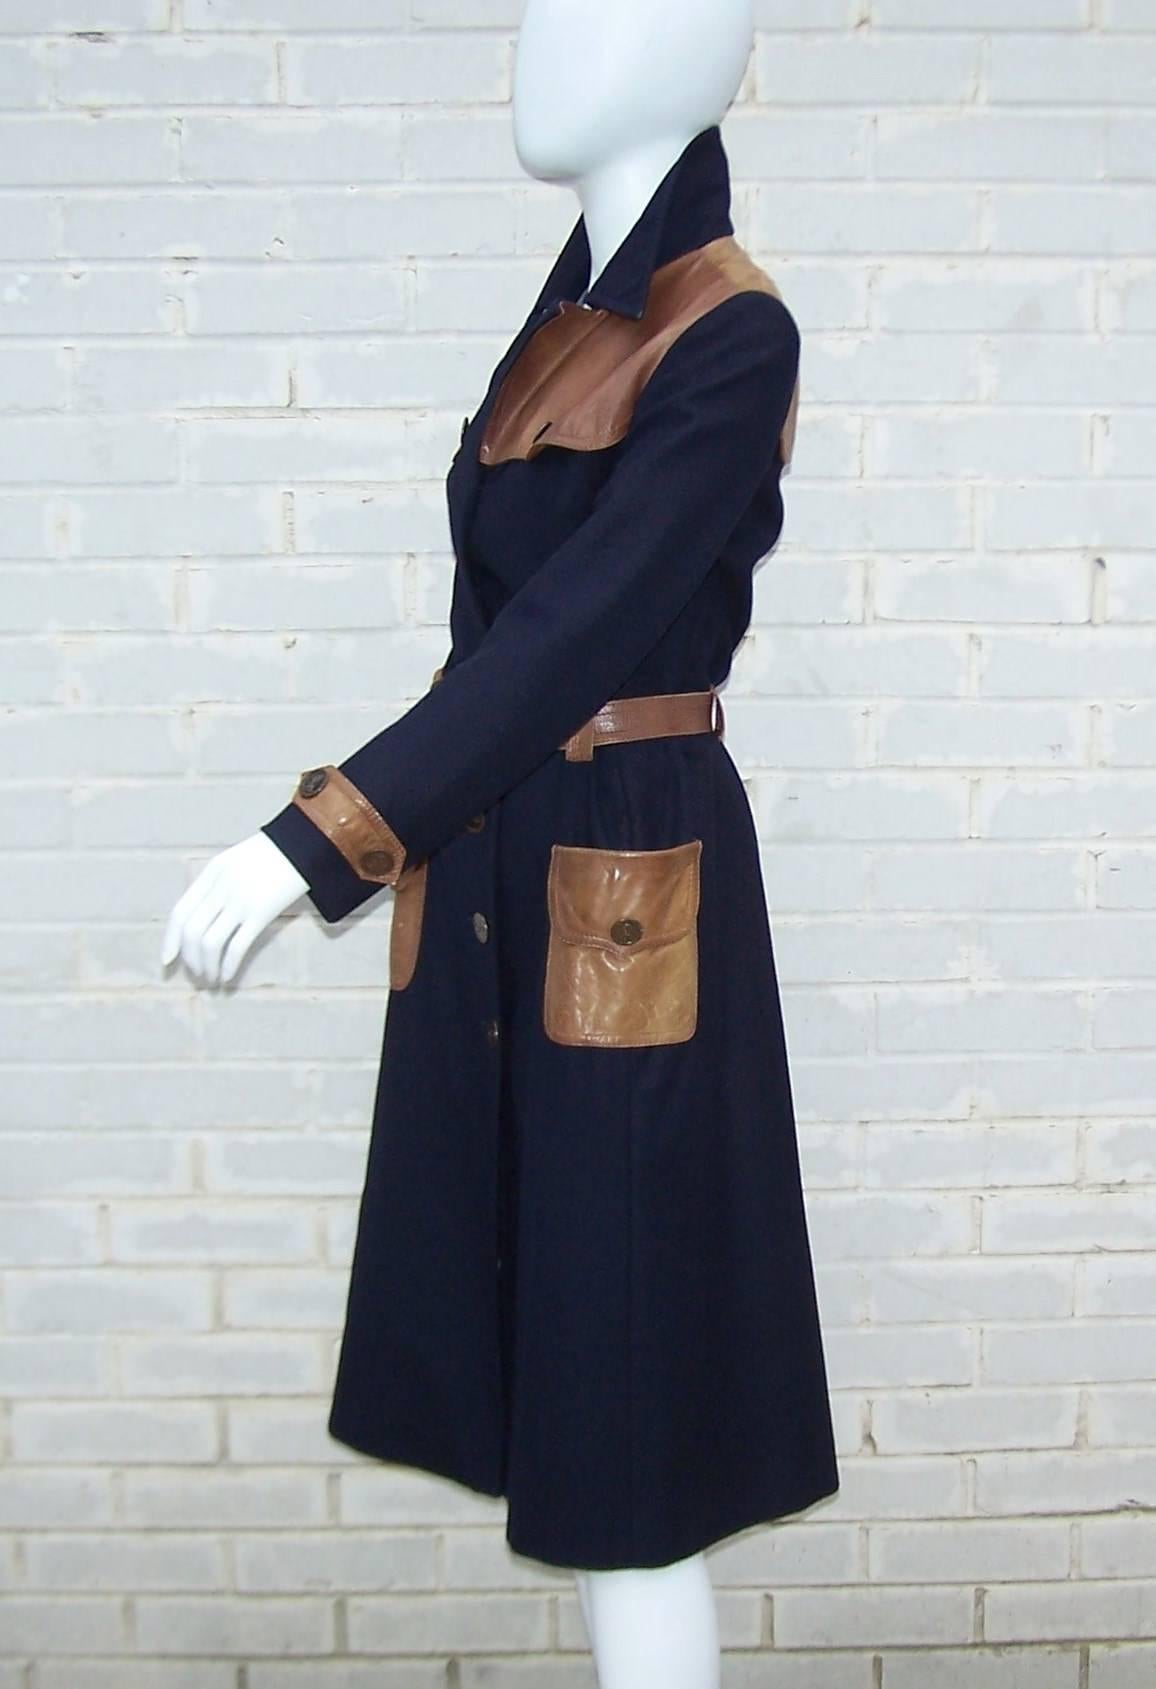 This is a trench coat worthy of a Bond girl!  Medium weight navy blue wool is expertly styled with tan leather details and bronzed buttons decorated with Roberta Di Camerino’s signature trompe l’oeil buckle logo.  It is fully lined and buttons at